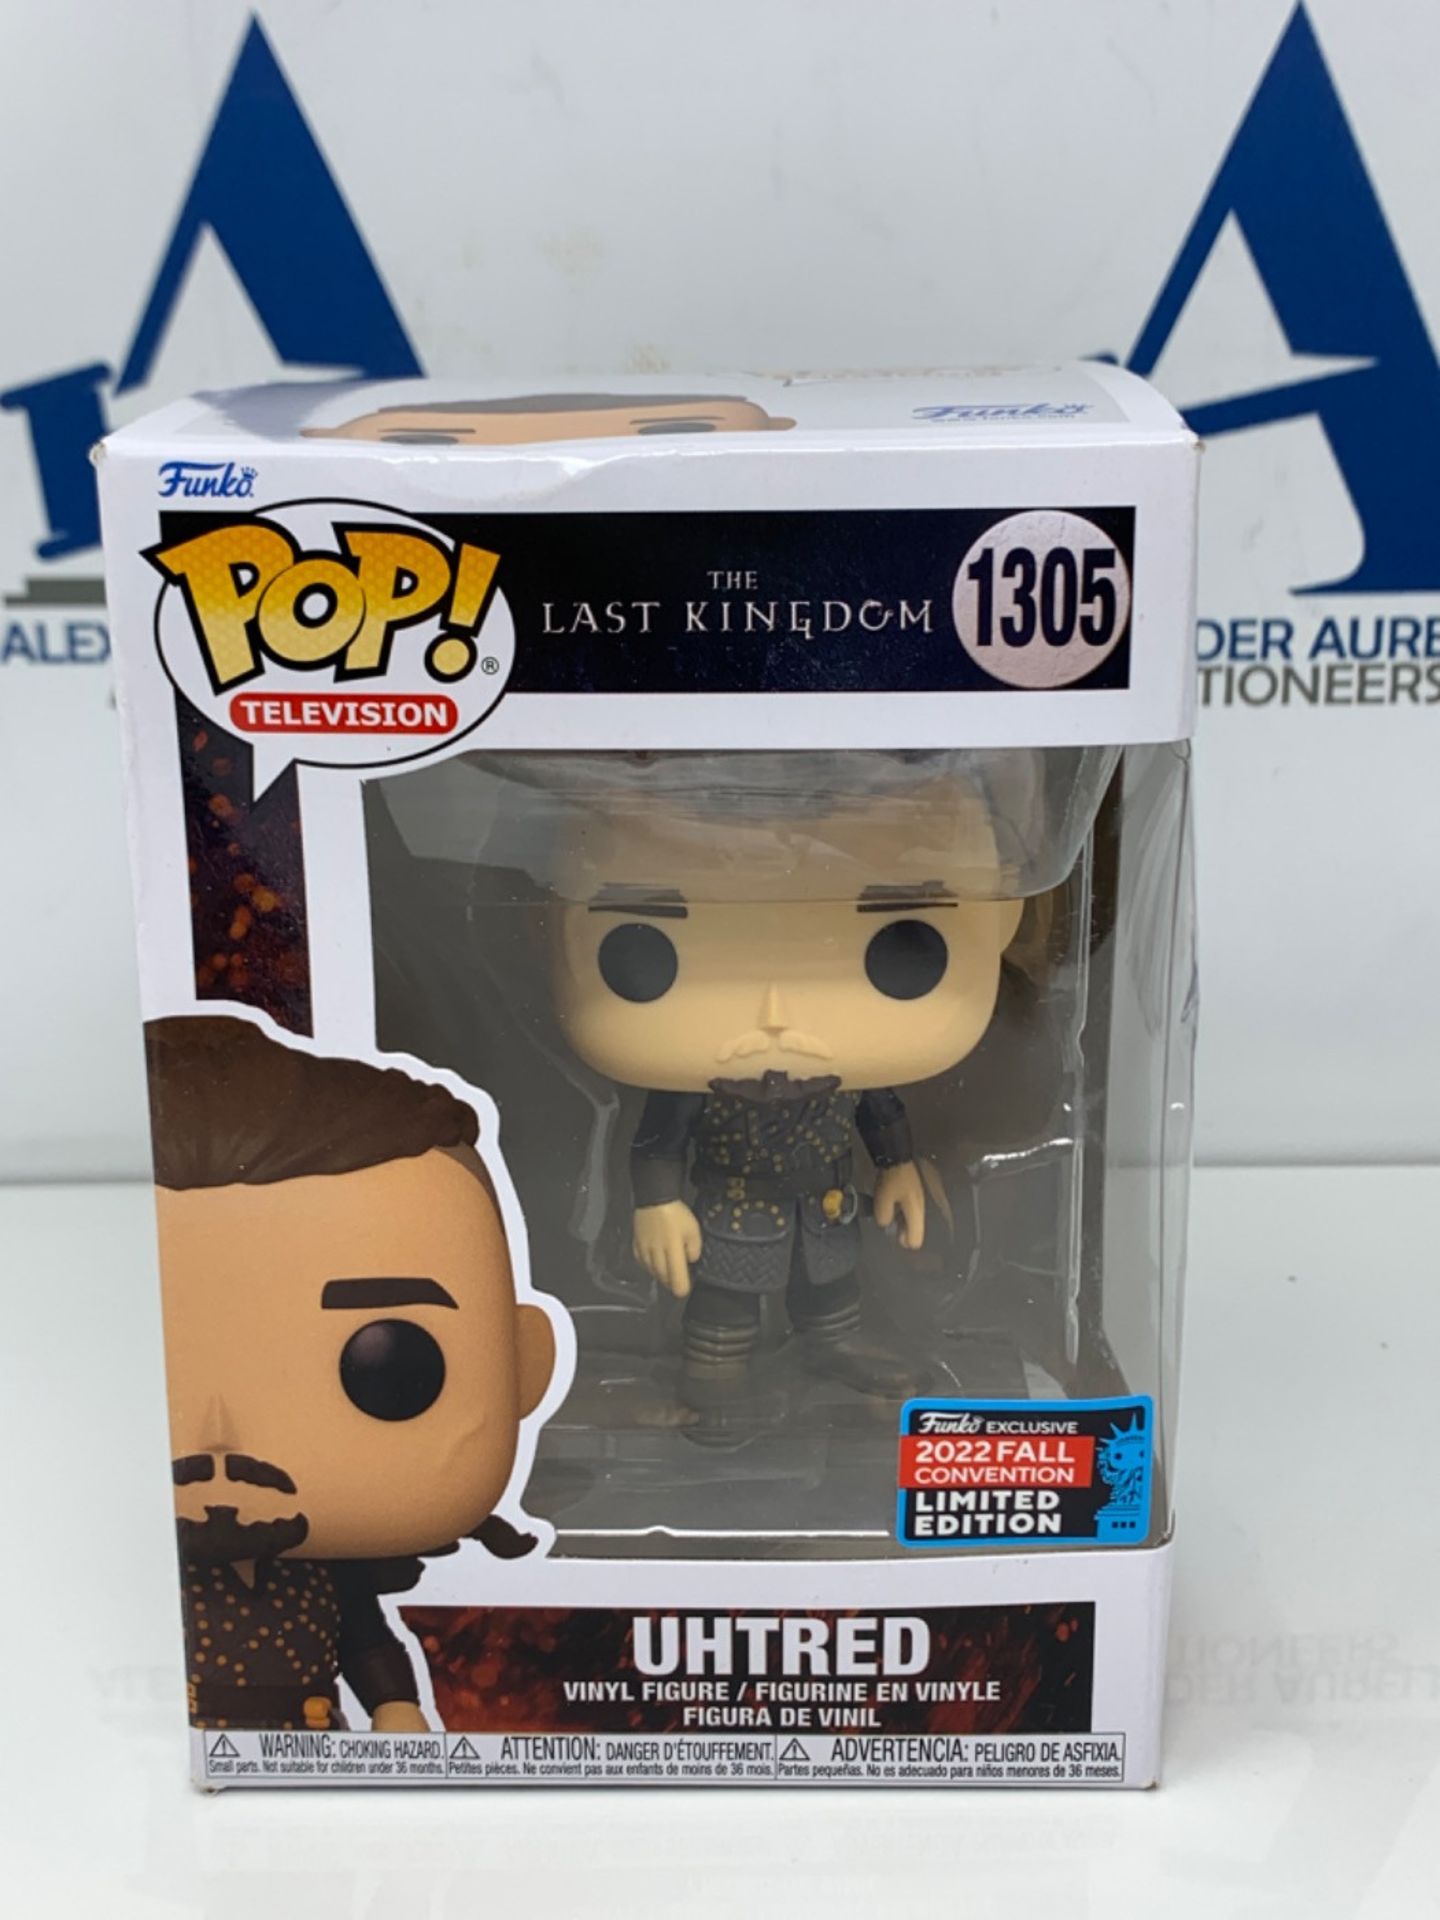 Funko Pop! TV: The Last Kingdom - Uhtred, Fall Convention Exclusive - Image 2 of 3